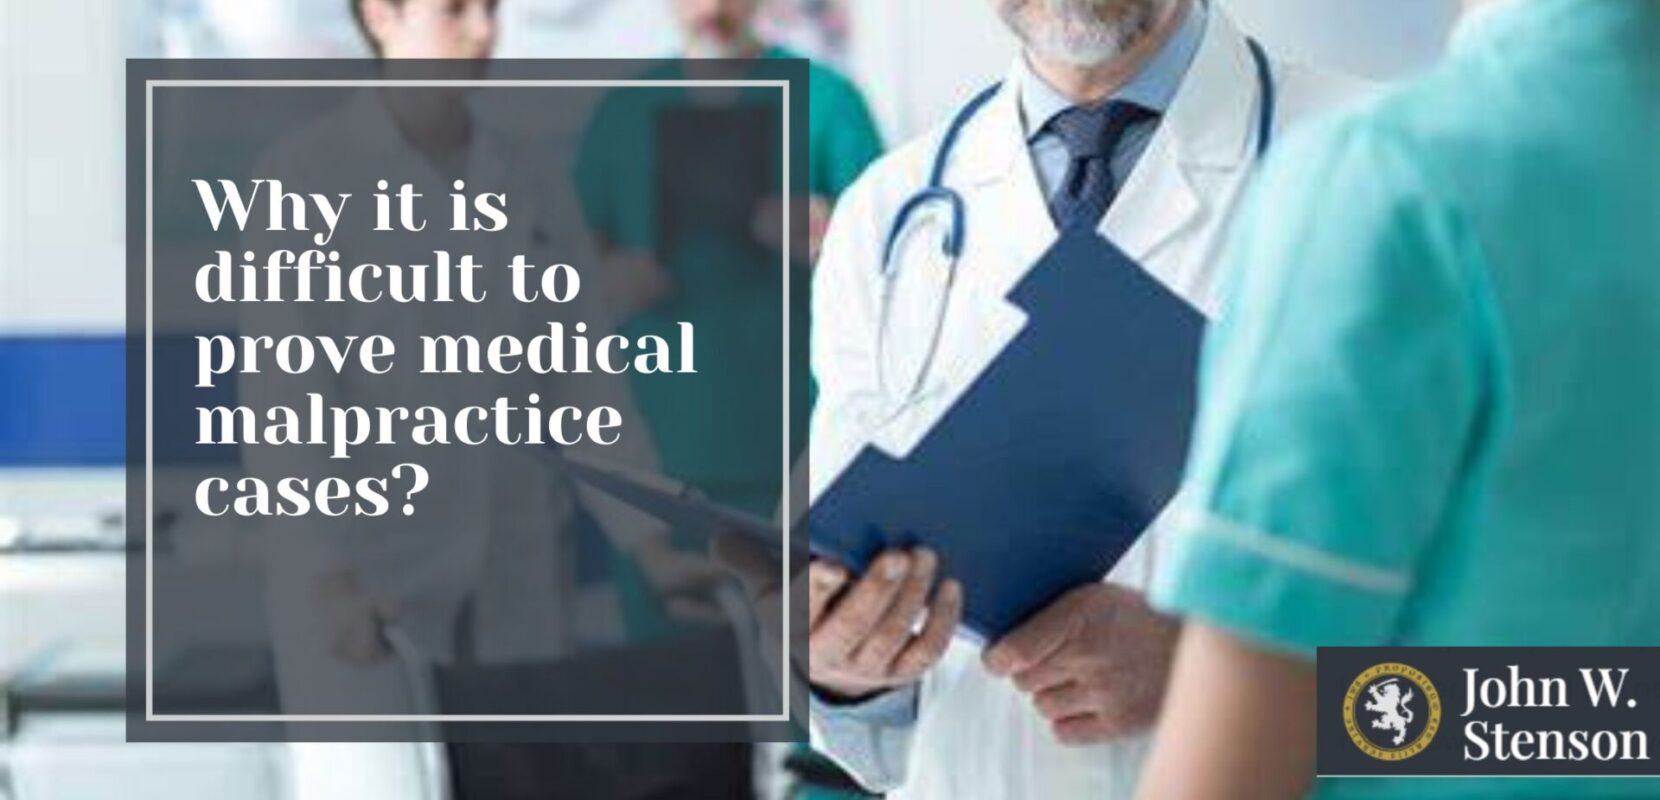 Why it is difficult to prove medical malpractice cases